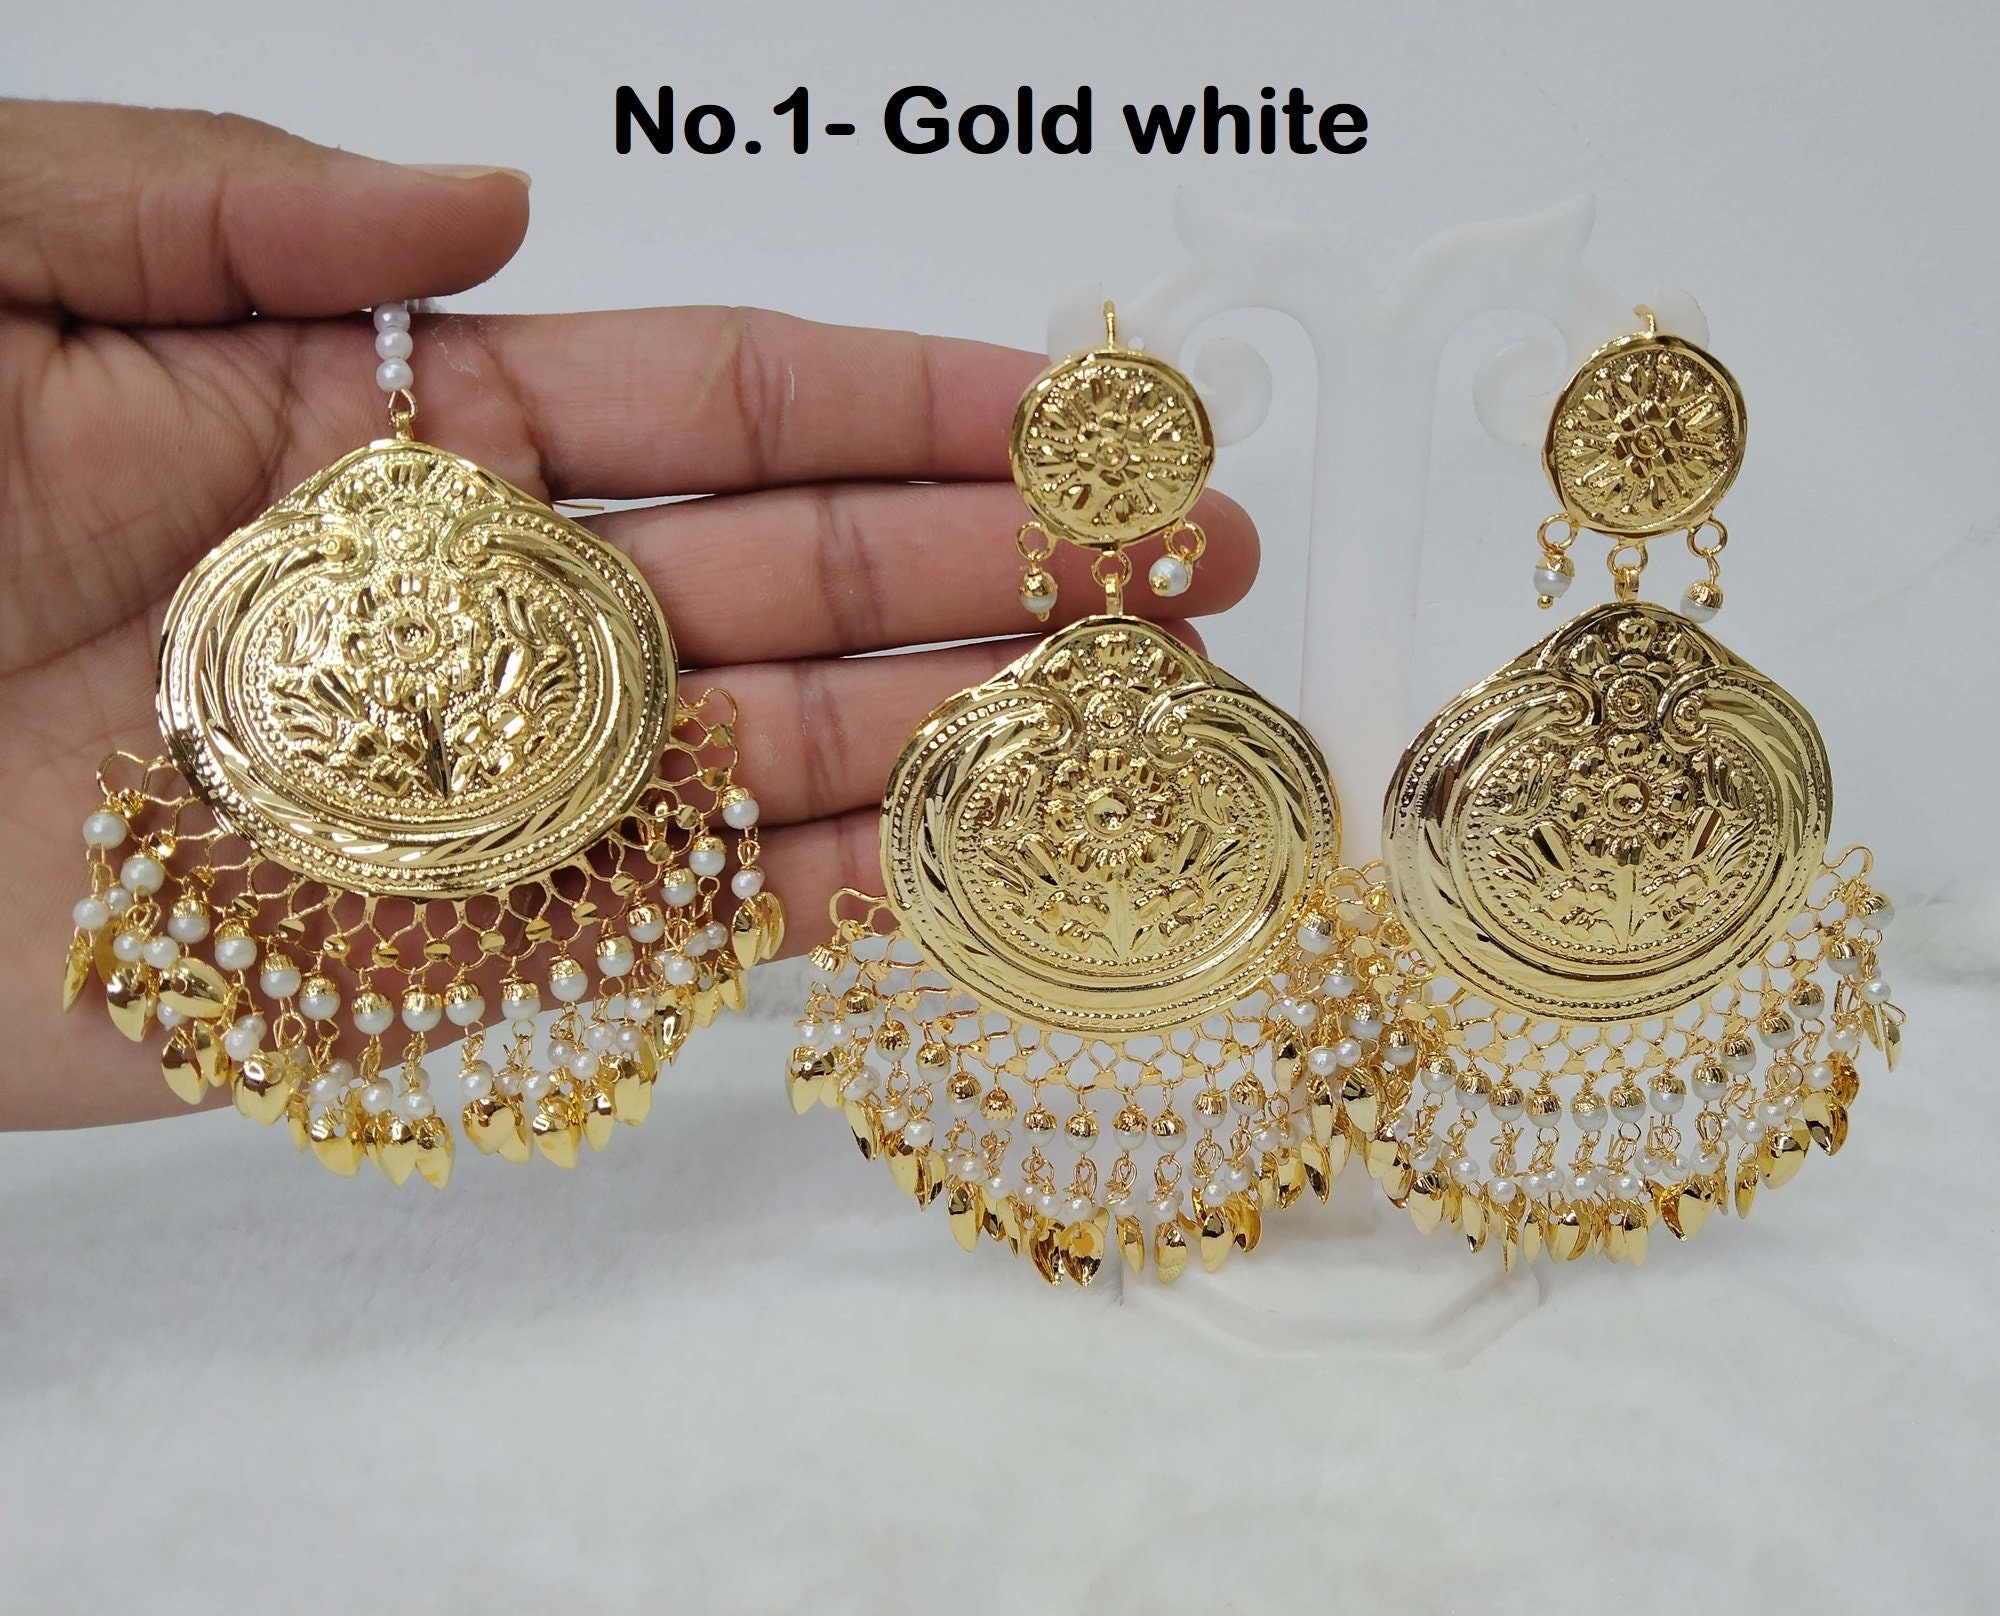 Real Gold Plated Punjabi Morewali Earrings J0216 - muteyaar.com | Gold  jewelry for sale, Gold jewelry fashion, Gold jewelry stores